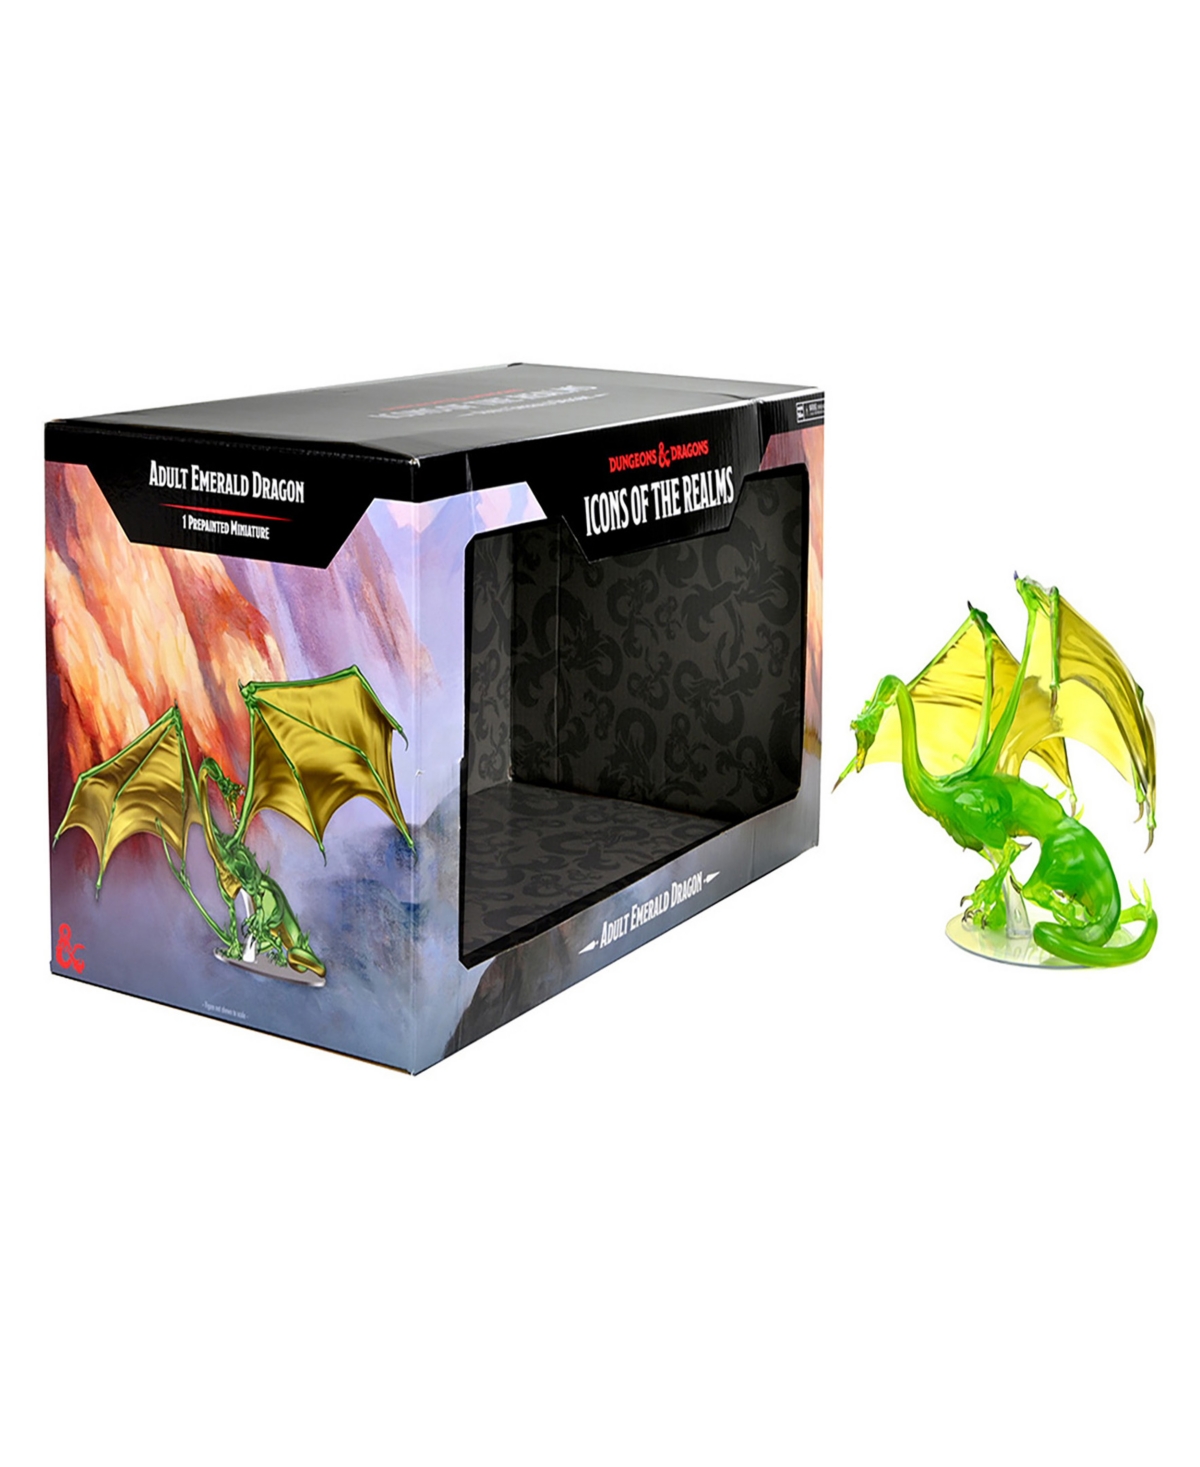 Shop Wizkids Games Dungeons Dragons Icons Of The Realms Adult Emerald Dragon Premium Figure In Multi